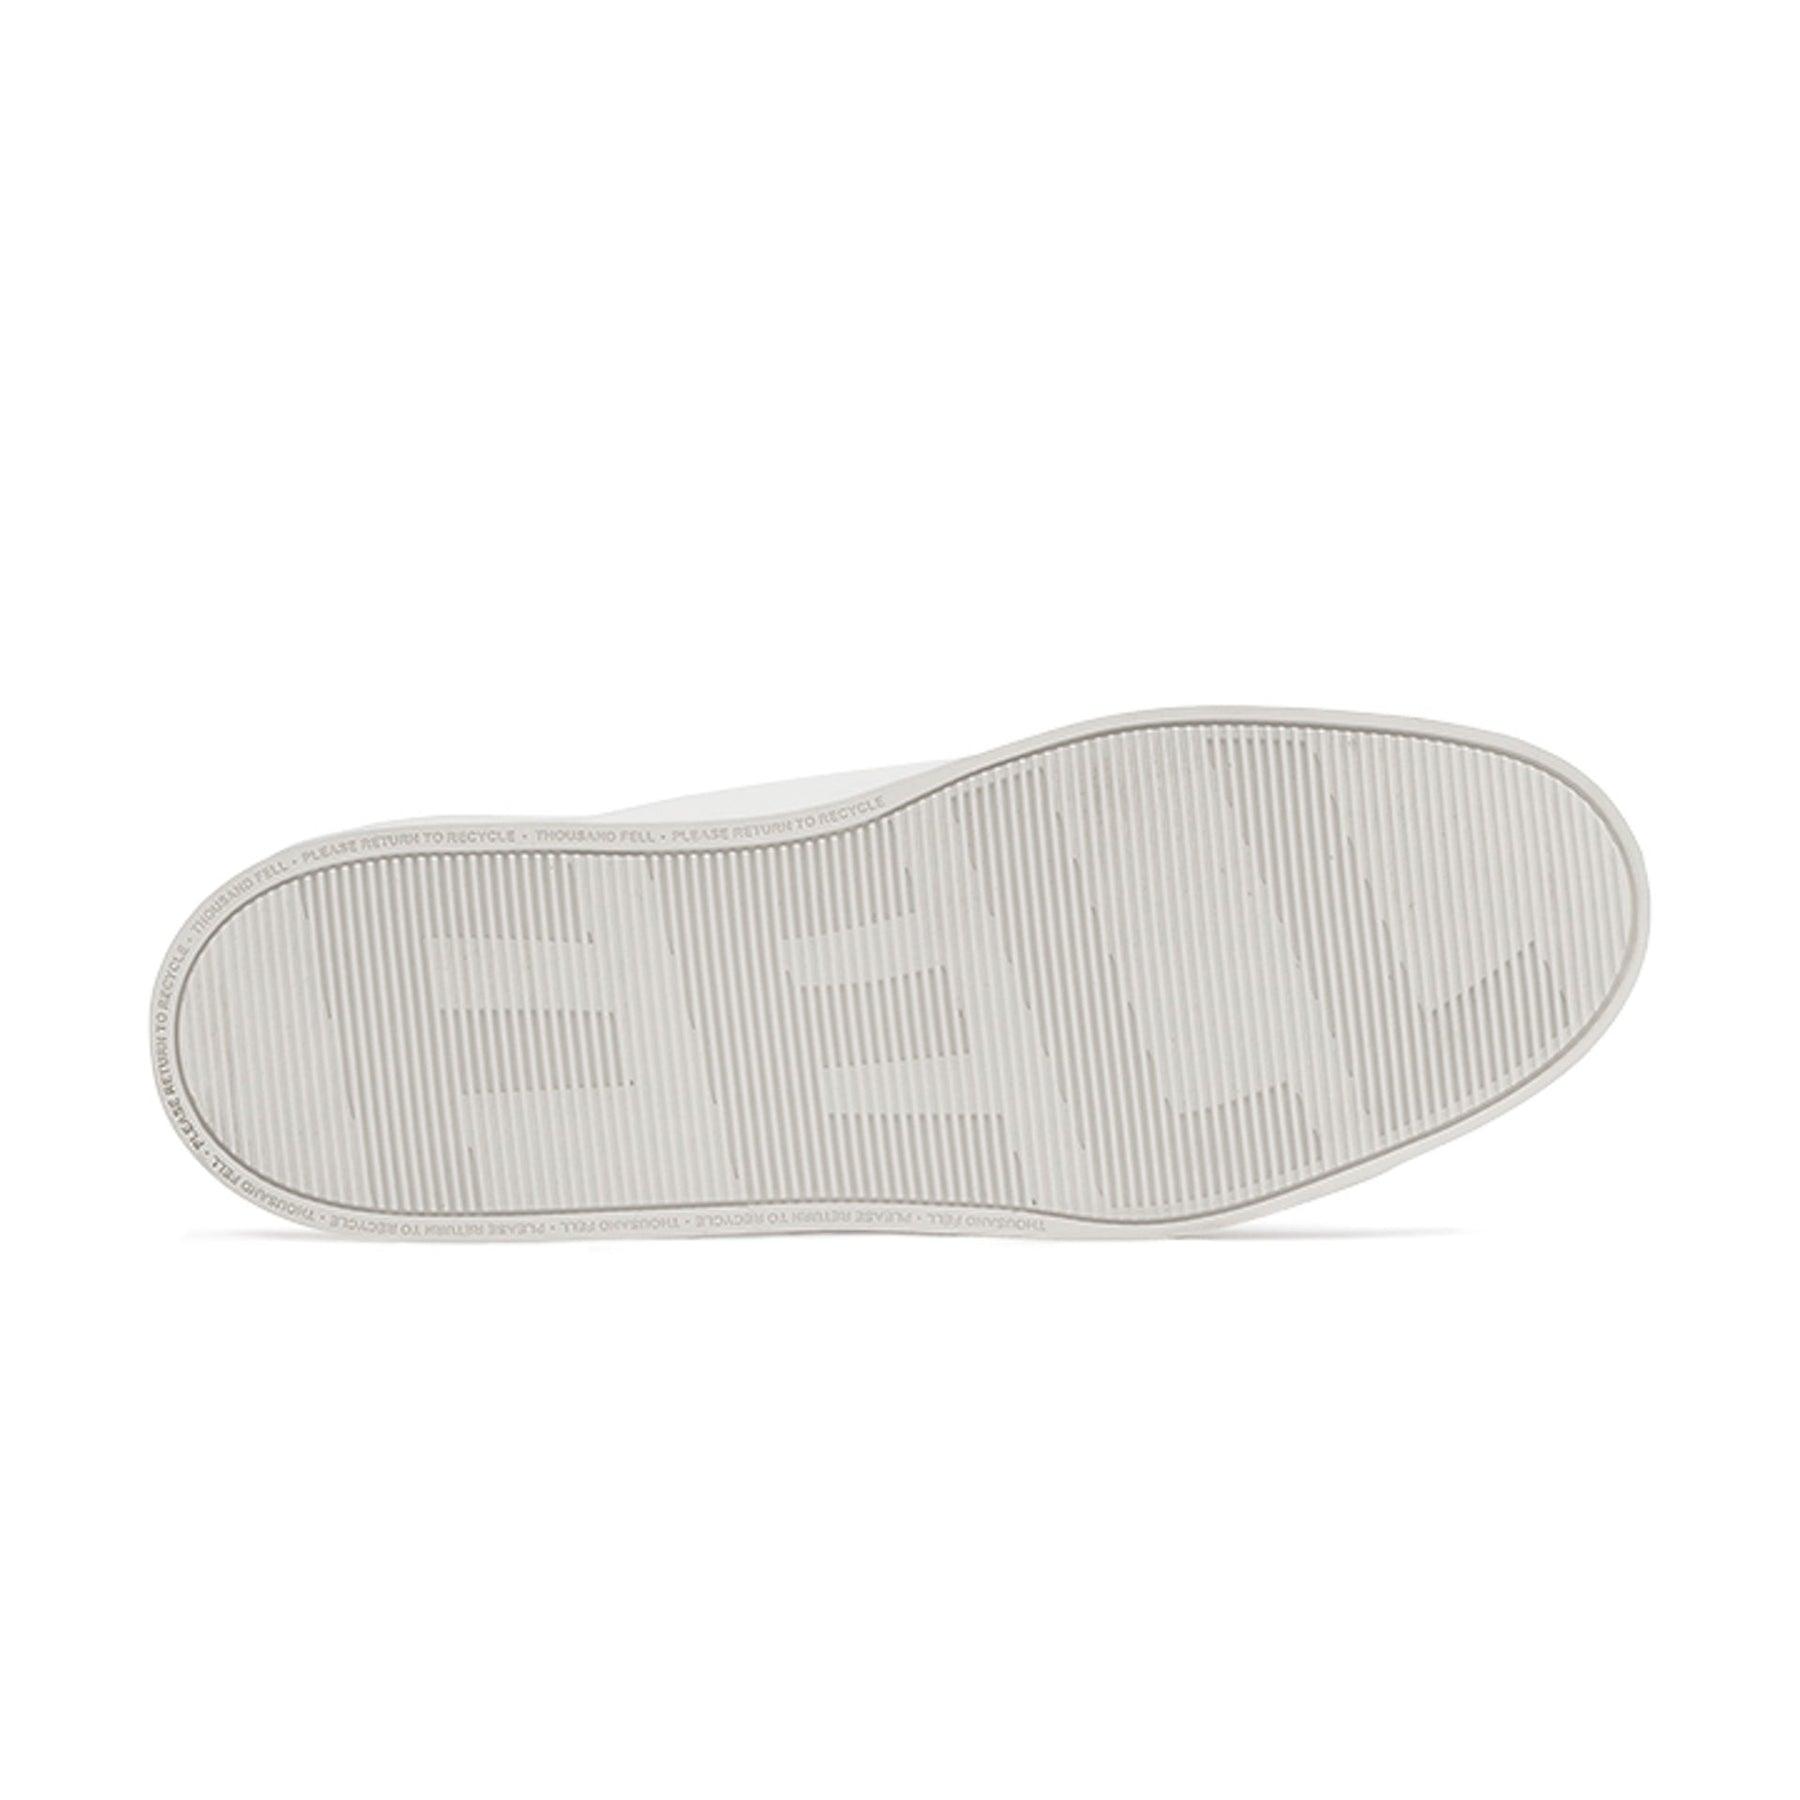 sole view of sustainable white slips on